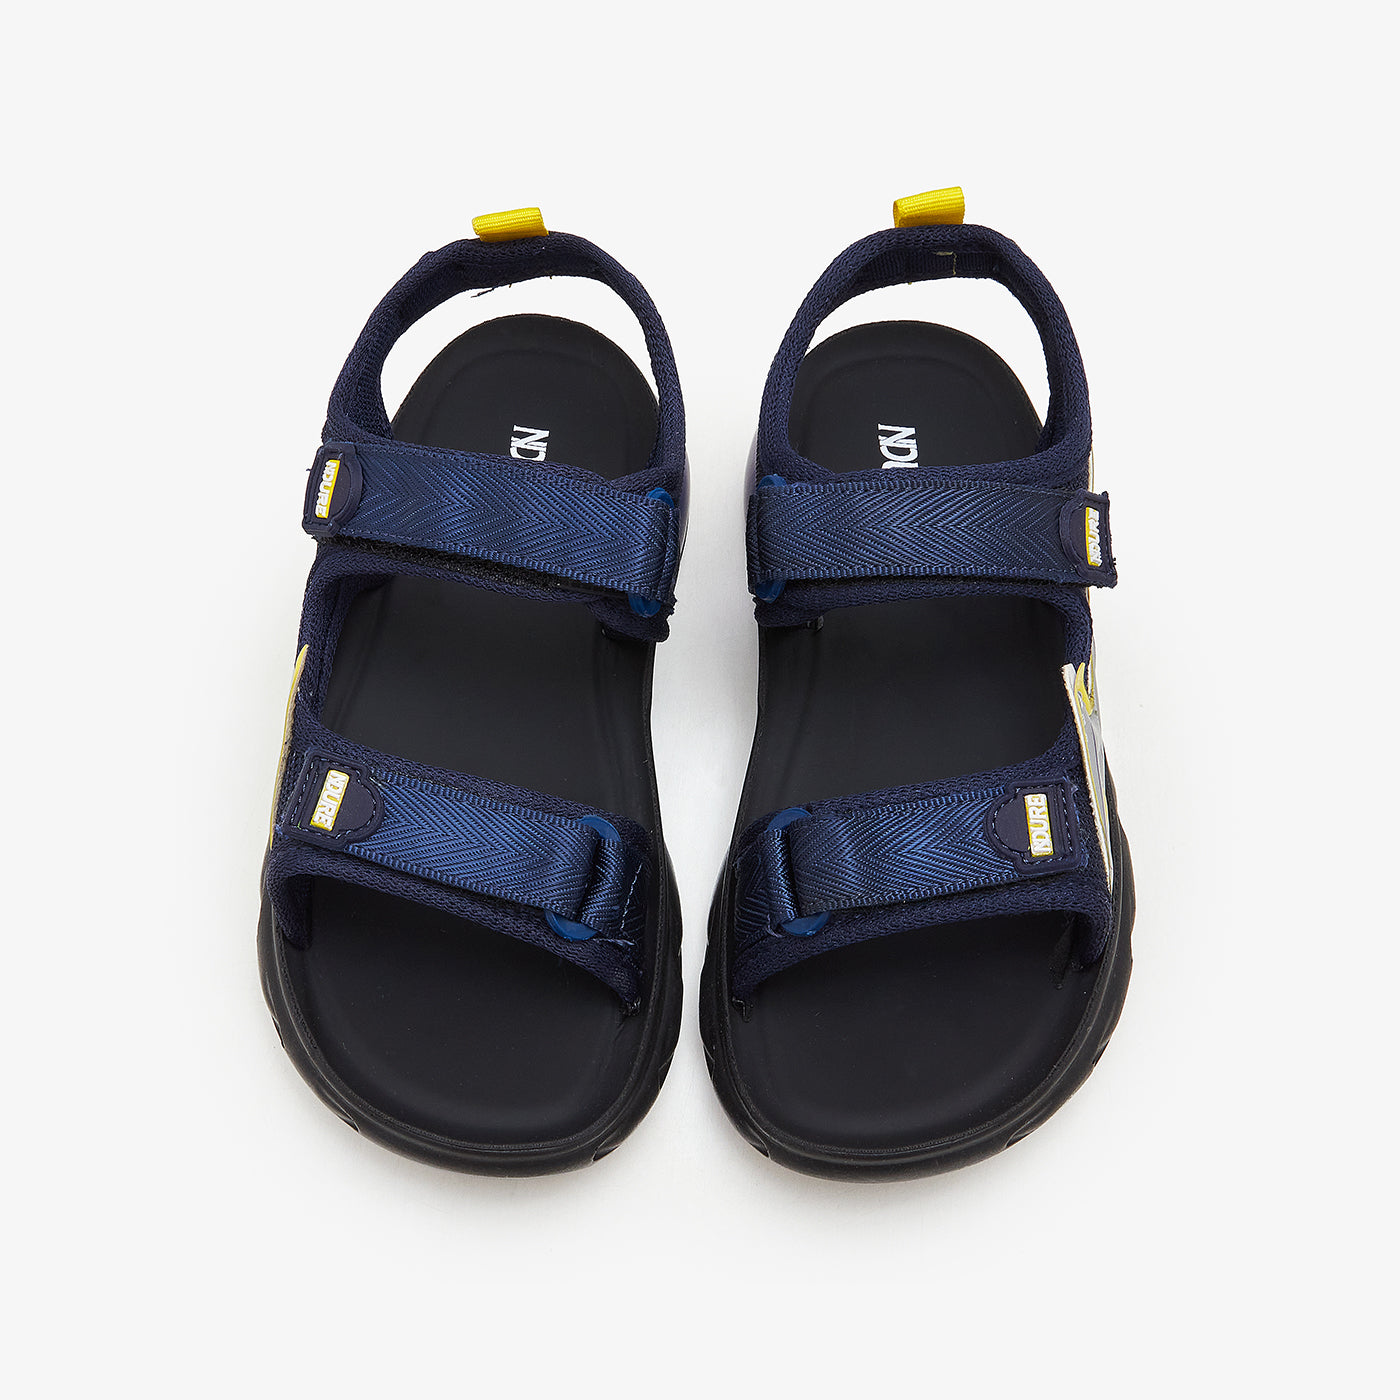 Boys' sandals size 11, compare prices and buy online